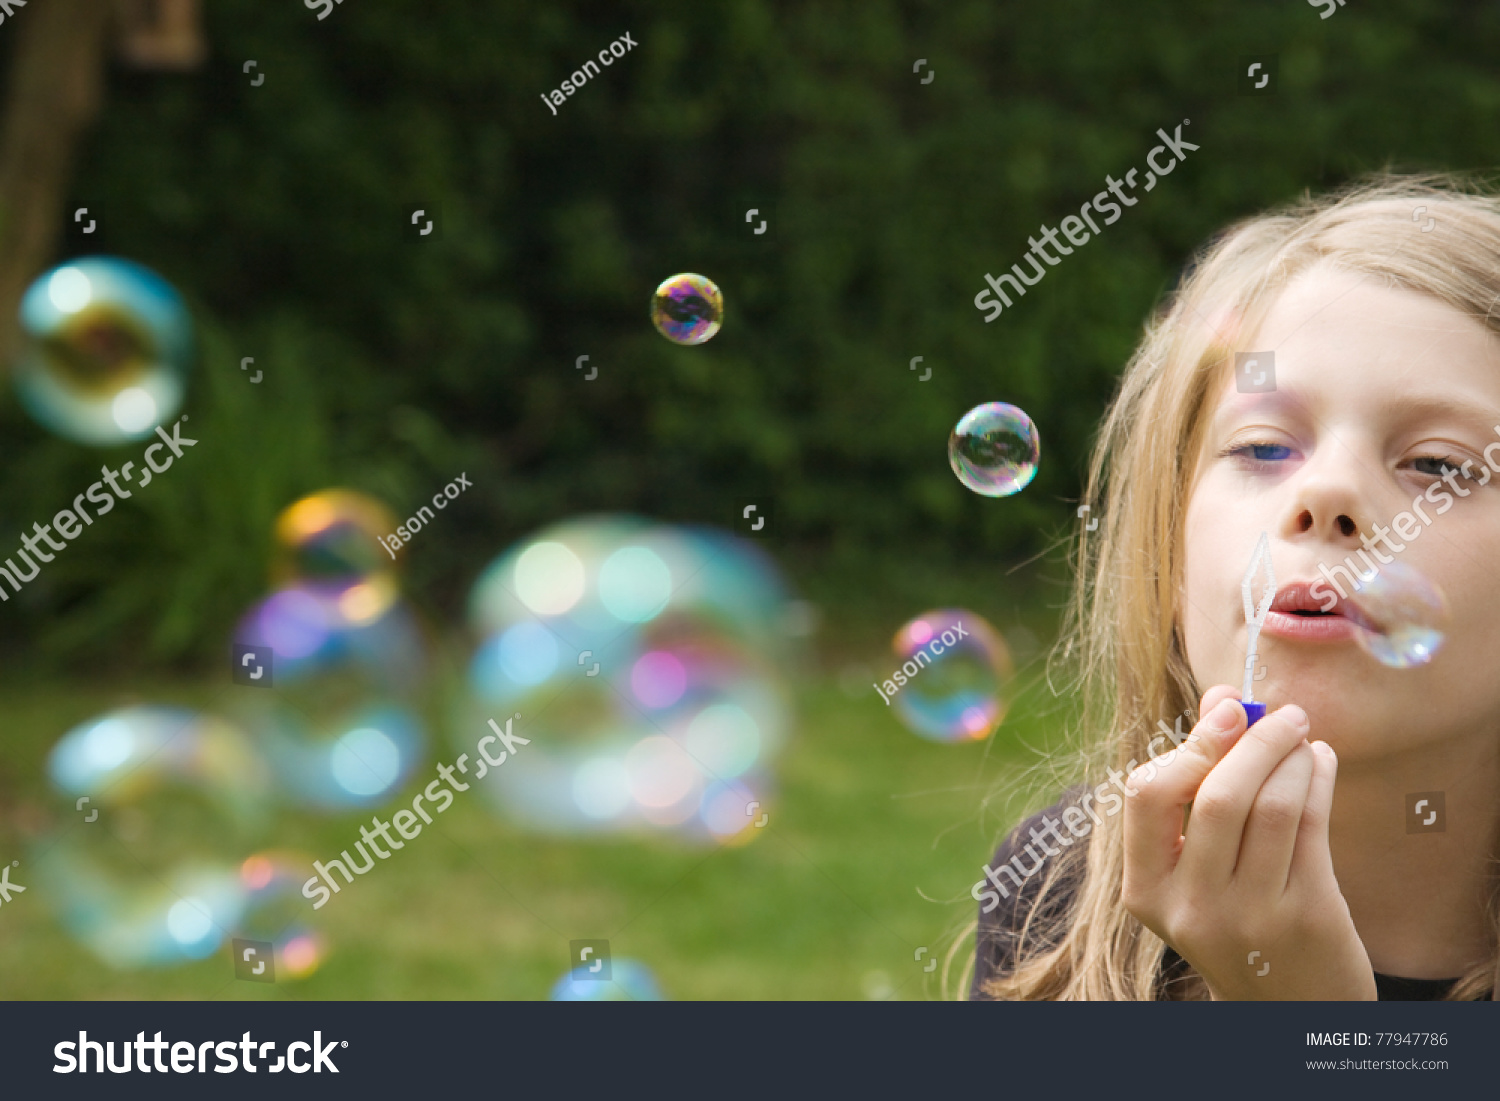 Young Girl Blowing Bubbles Stock Photo 77947786 | Shutterstock